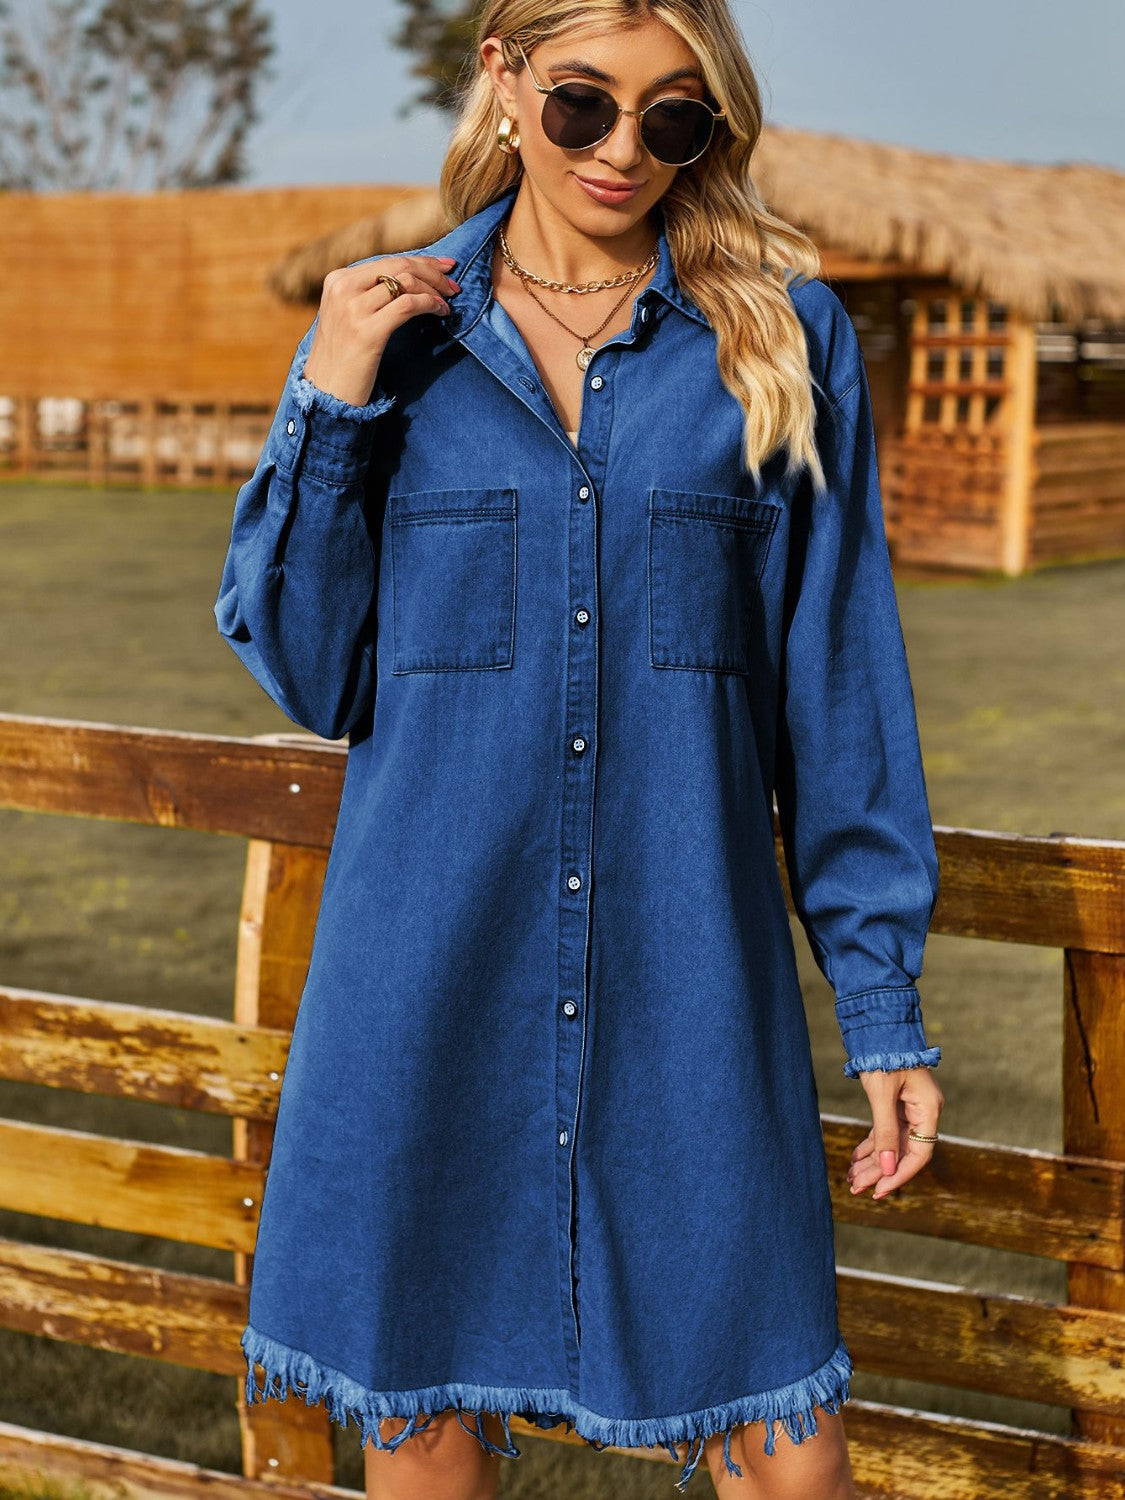 Shop the versatile denim dress with a chic raw hem and flattering waistline—perfect for casual outings and effortless style.